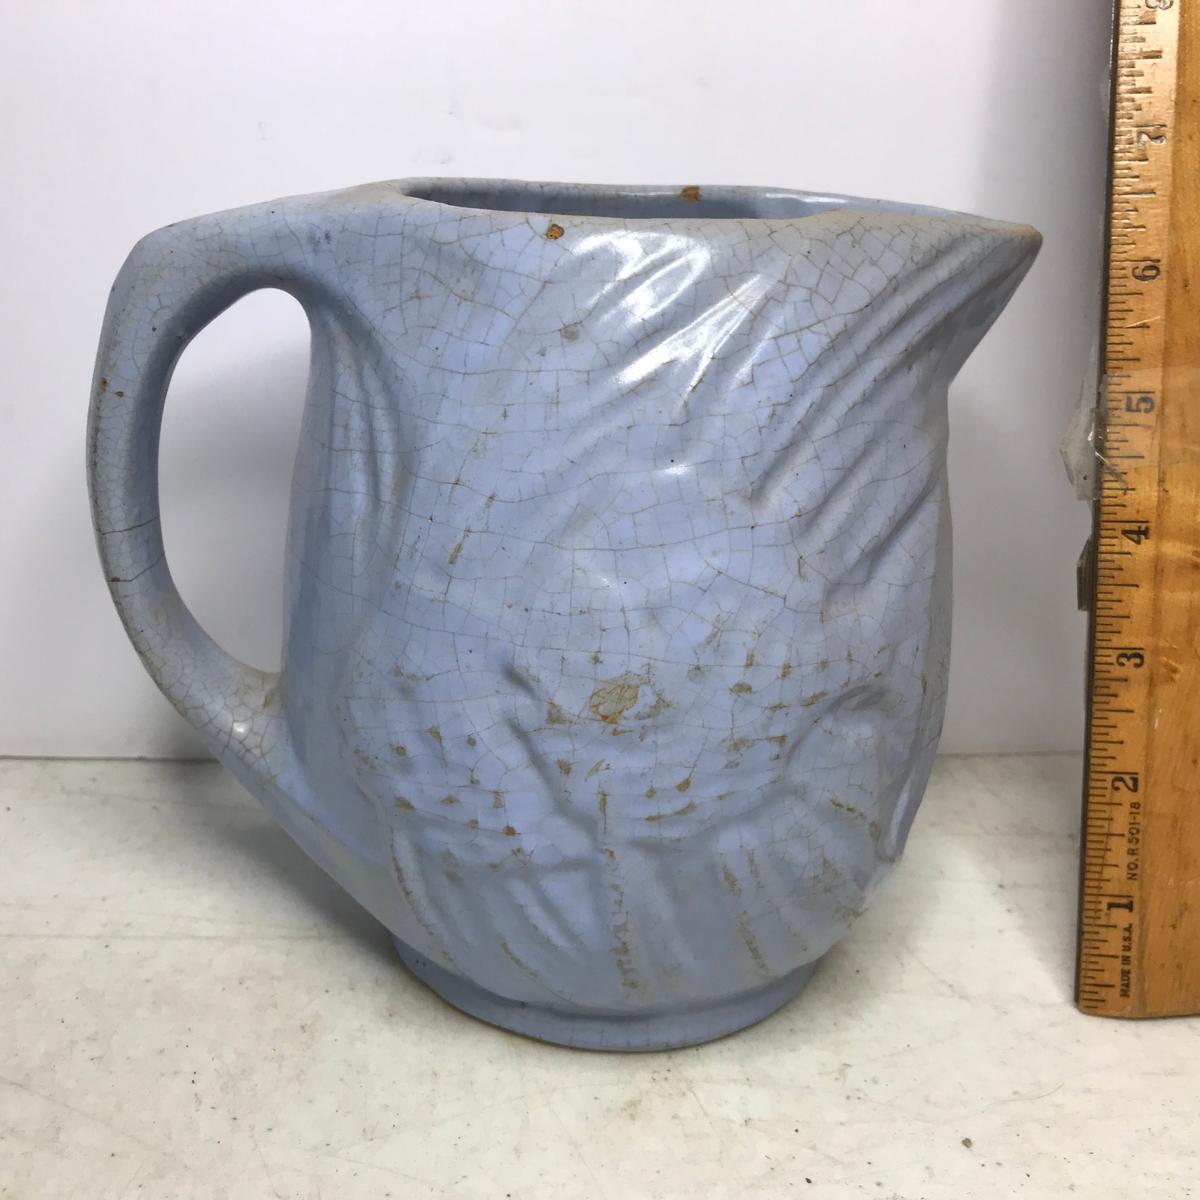 Old Baby Blue Pottery Pitcher with Embossed Fish Design on Sides